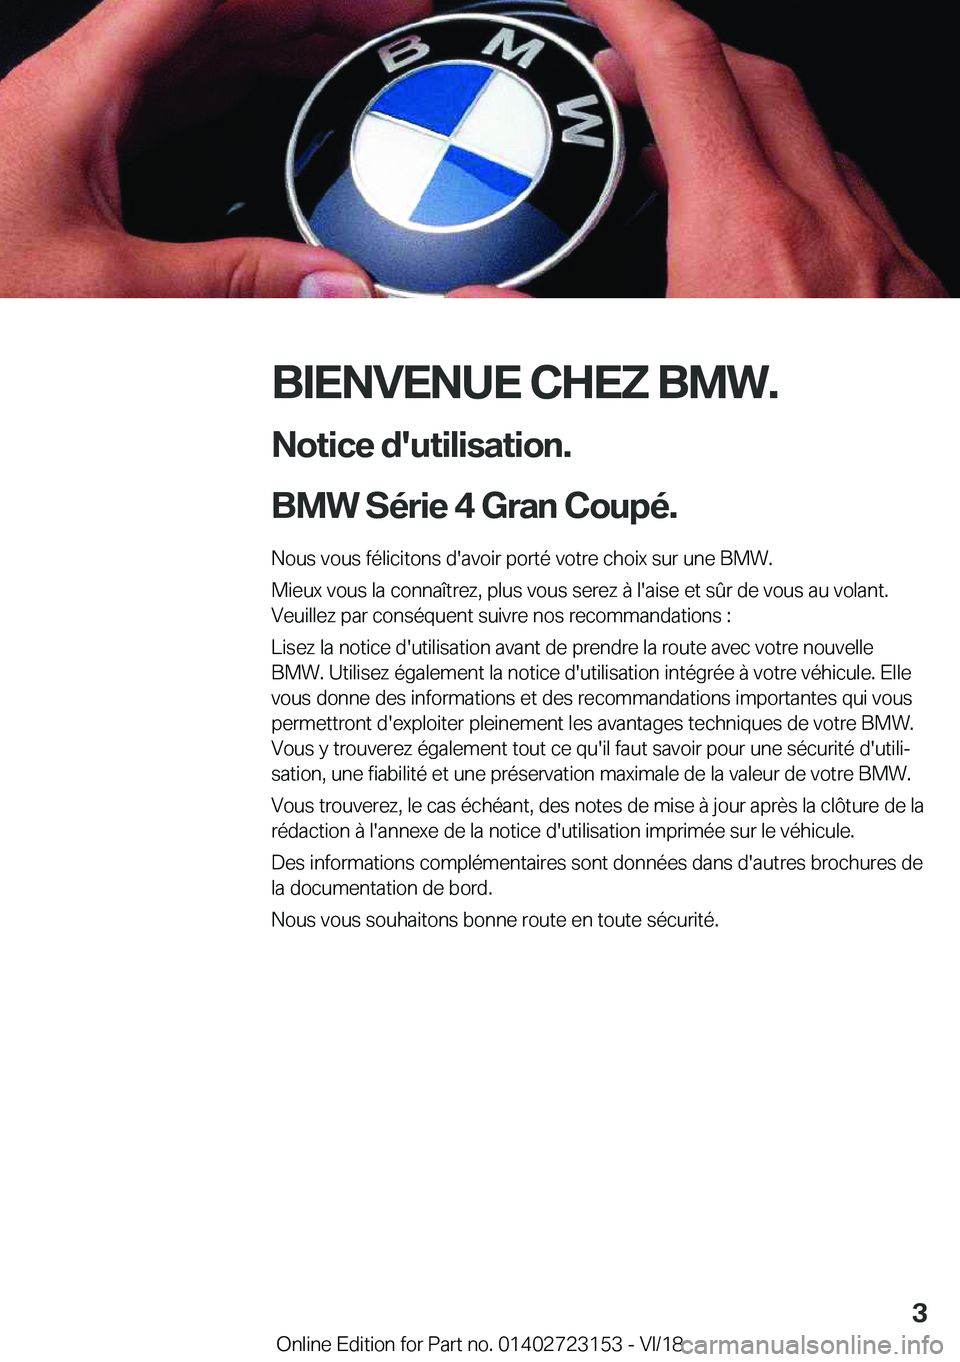 BMW 4 SERIES COUPE 2019  Notices Demploi (in French) �B�I�E�N�V�E�N�U�E��C�H�E�;��B�M�W�.�N�o�t�i�c�e��d�'�u�t�i�l�i�s�a�t�i�o�n�.
�B�M�W��S�é�r�i�e��4��G�r�a�n��C�o�u�p�é�.�
�N�o�u�s��v�o�u�s��f�é�l�i�c�i�t�o�n�s��d�'�a�v�o�i�r��